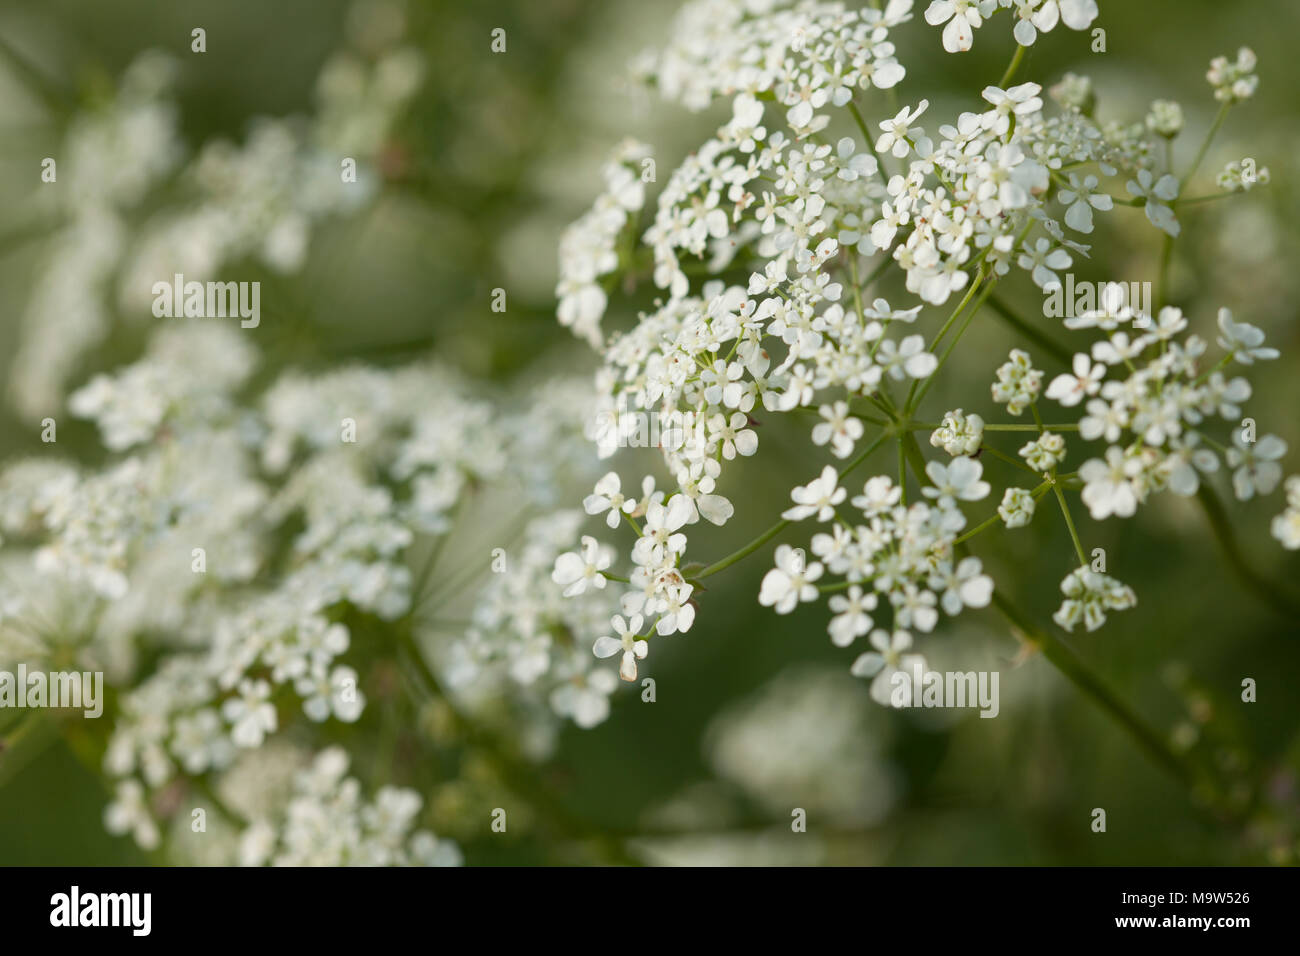 The delicate lace-like flower heads of cow parsley (Anthriscus sylvestris) lit by soft evening light in a Northamptonshire hedgerow, England. Stock Photo